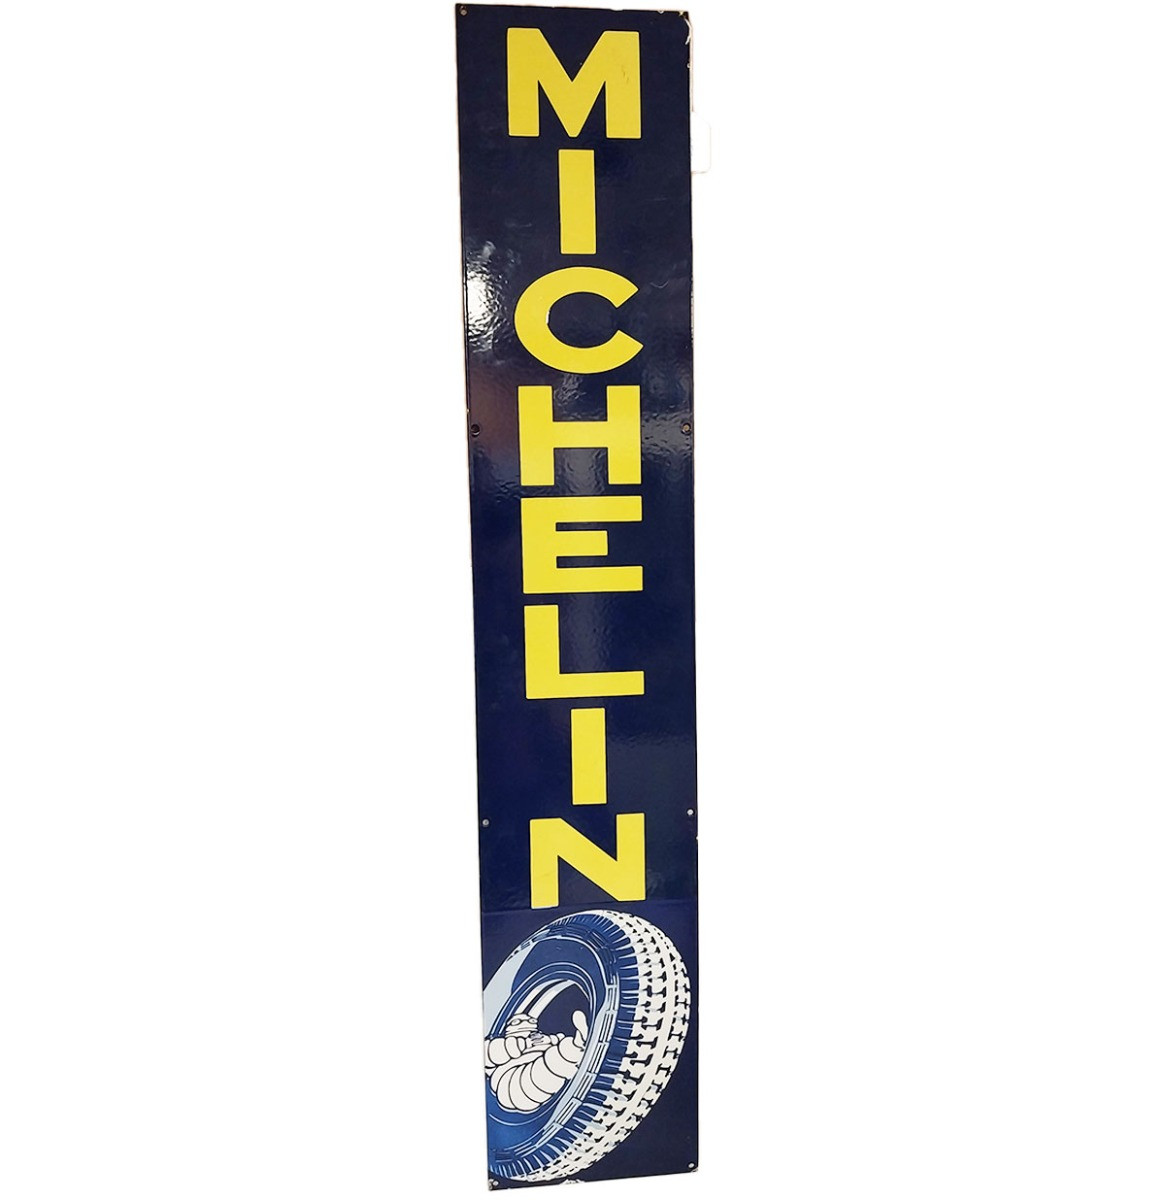 Michelin Tyres Verticaal Emaille Bord - 122 x 23cm